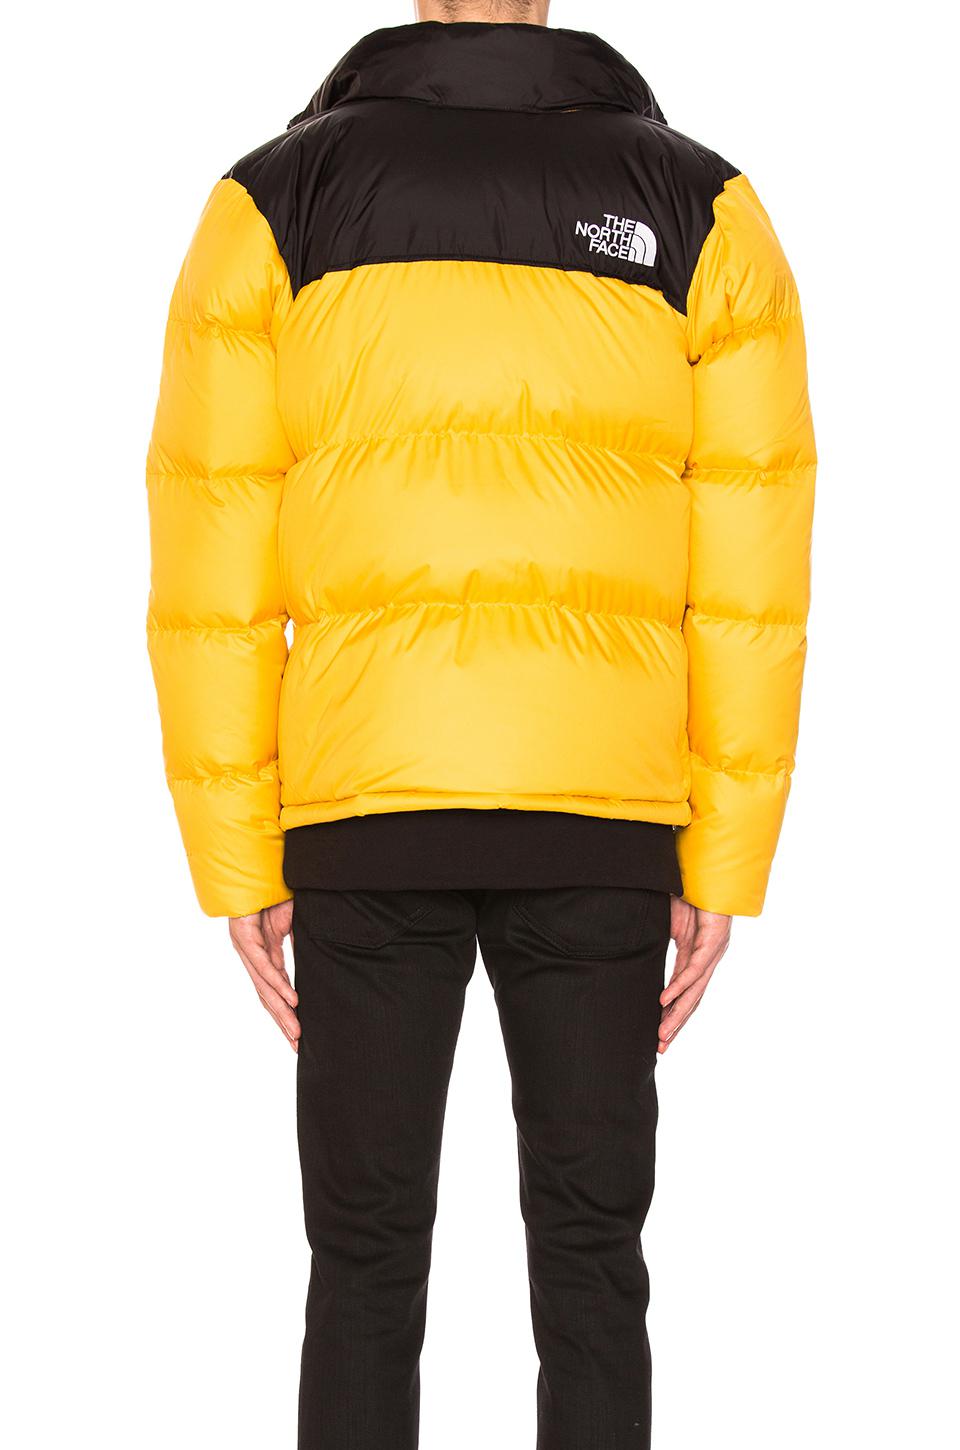 Lyst - The North Face Yellow & Black Down Novelty Nuptse Jacket in ...